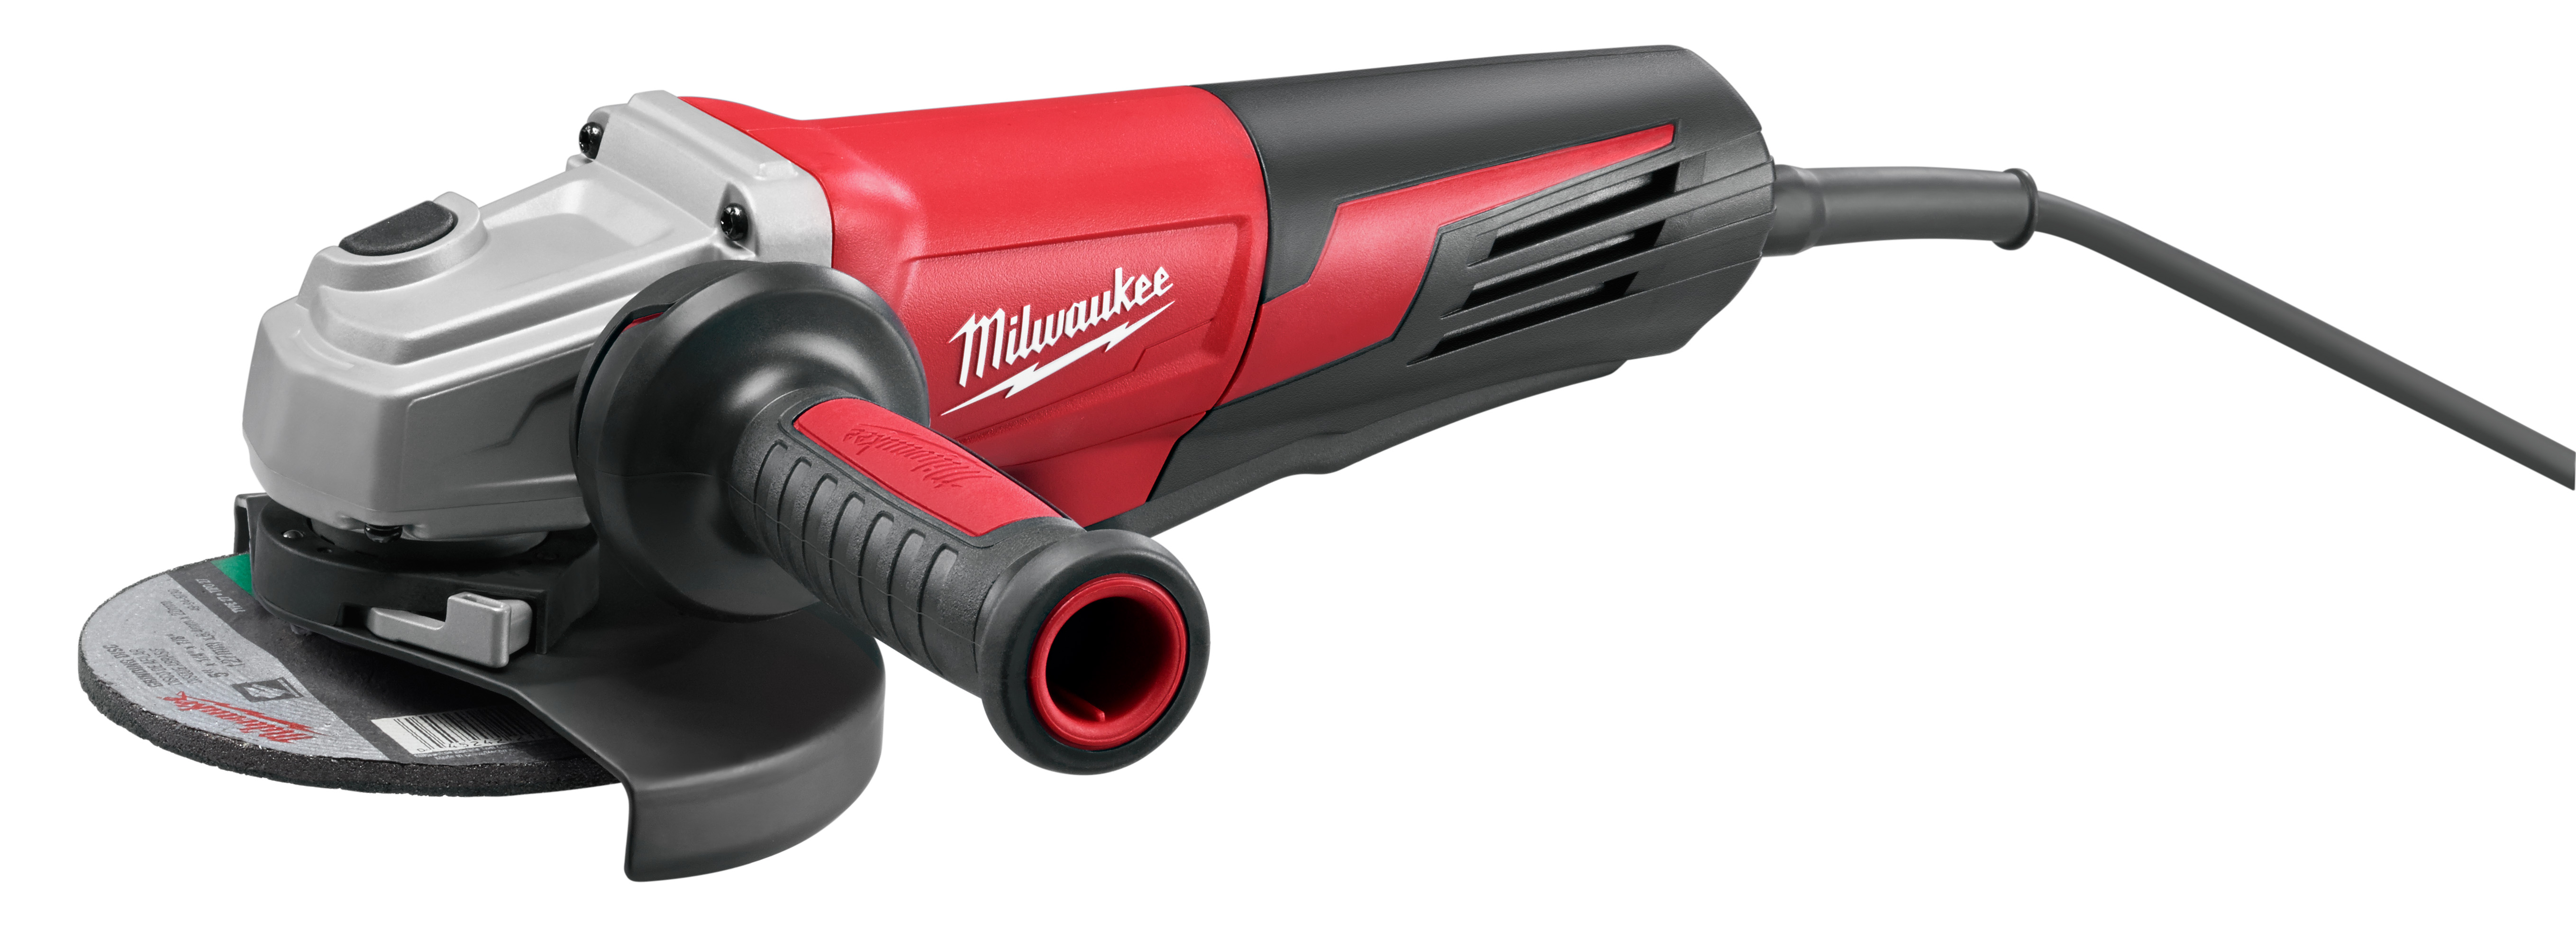 Milwaukee® 6161-30 Double Insulated Small Angle Grinder, 6 in Dia Wheel, 5/8-11 Arbor/Shank, 120 VAC, Black/Red